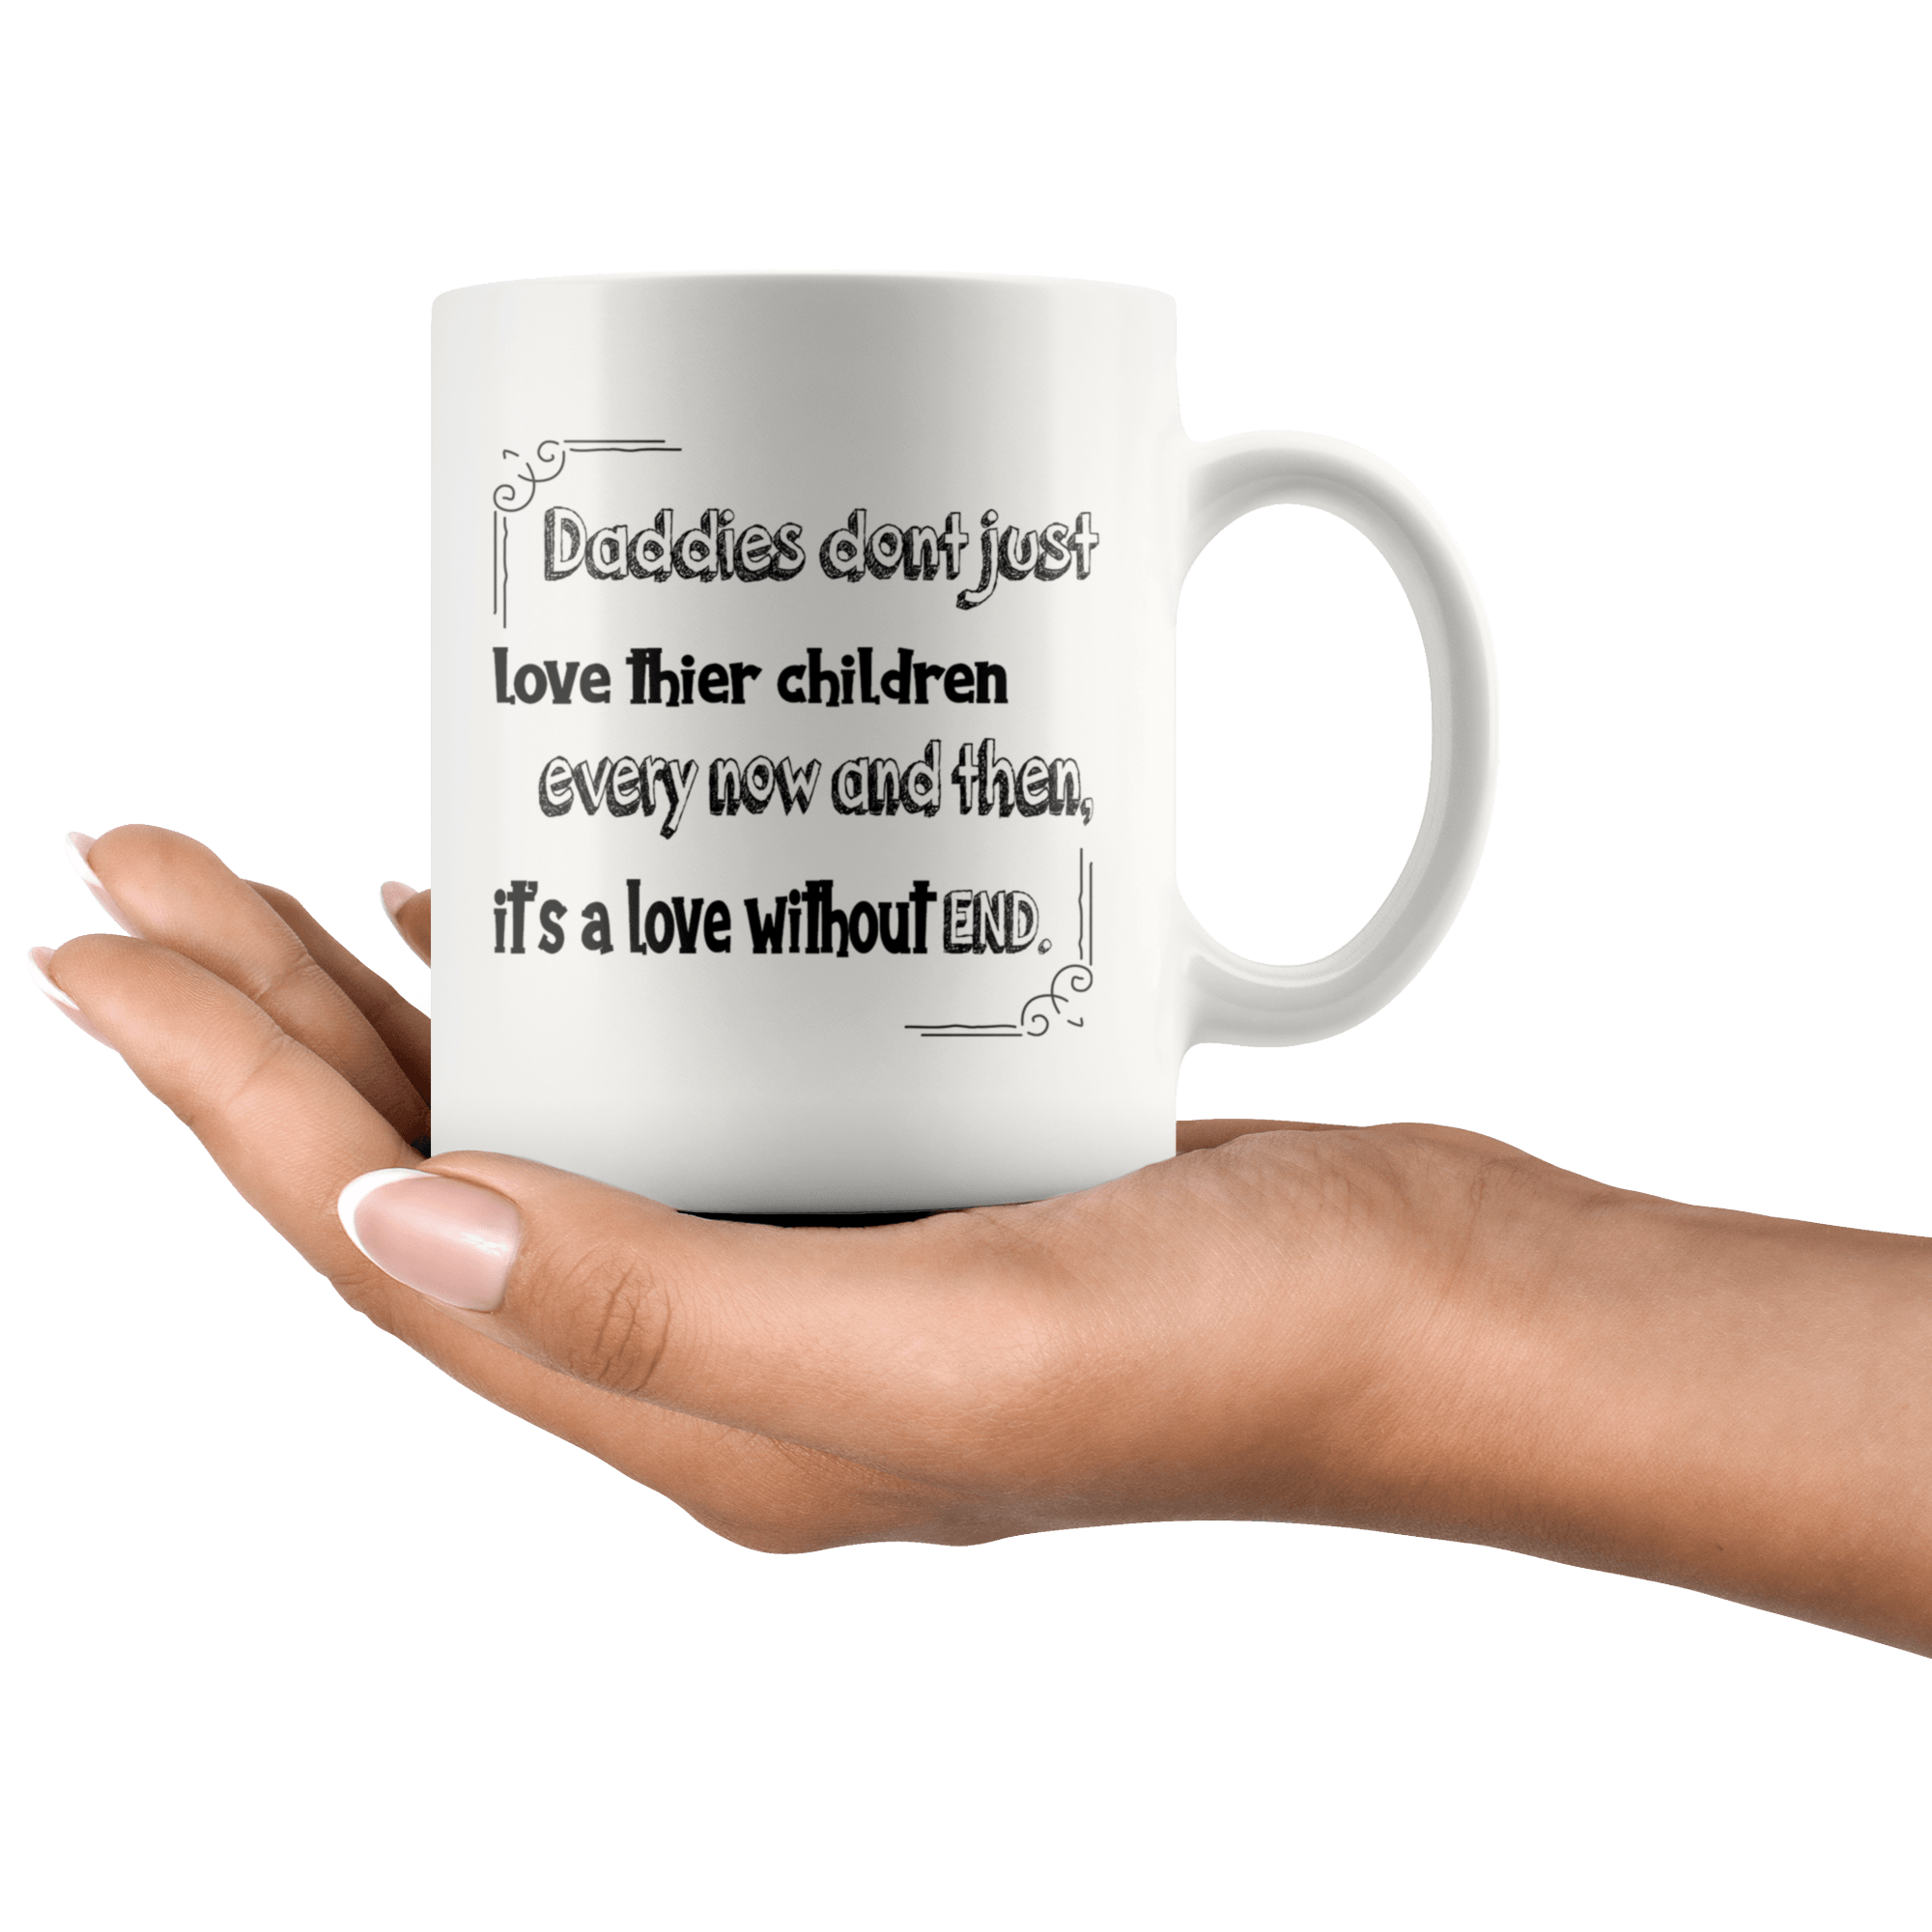 Great Coffee Mug For Father - Daddies Don't Just Love Their Children Every Now And Then, It's A Love Without End. - SPCM